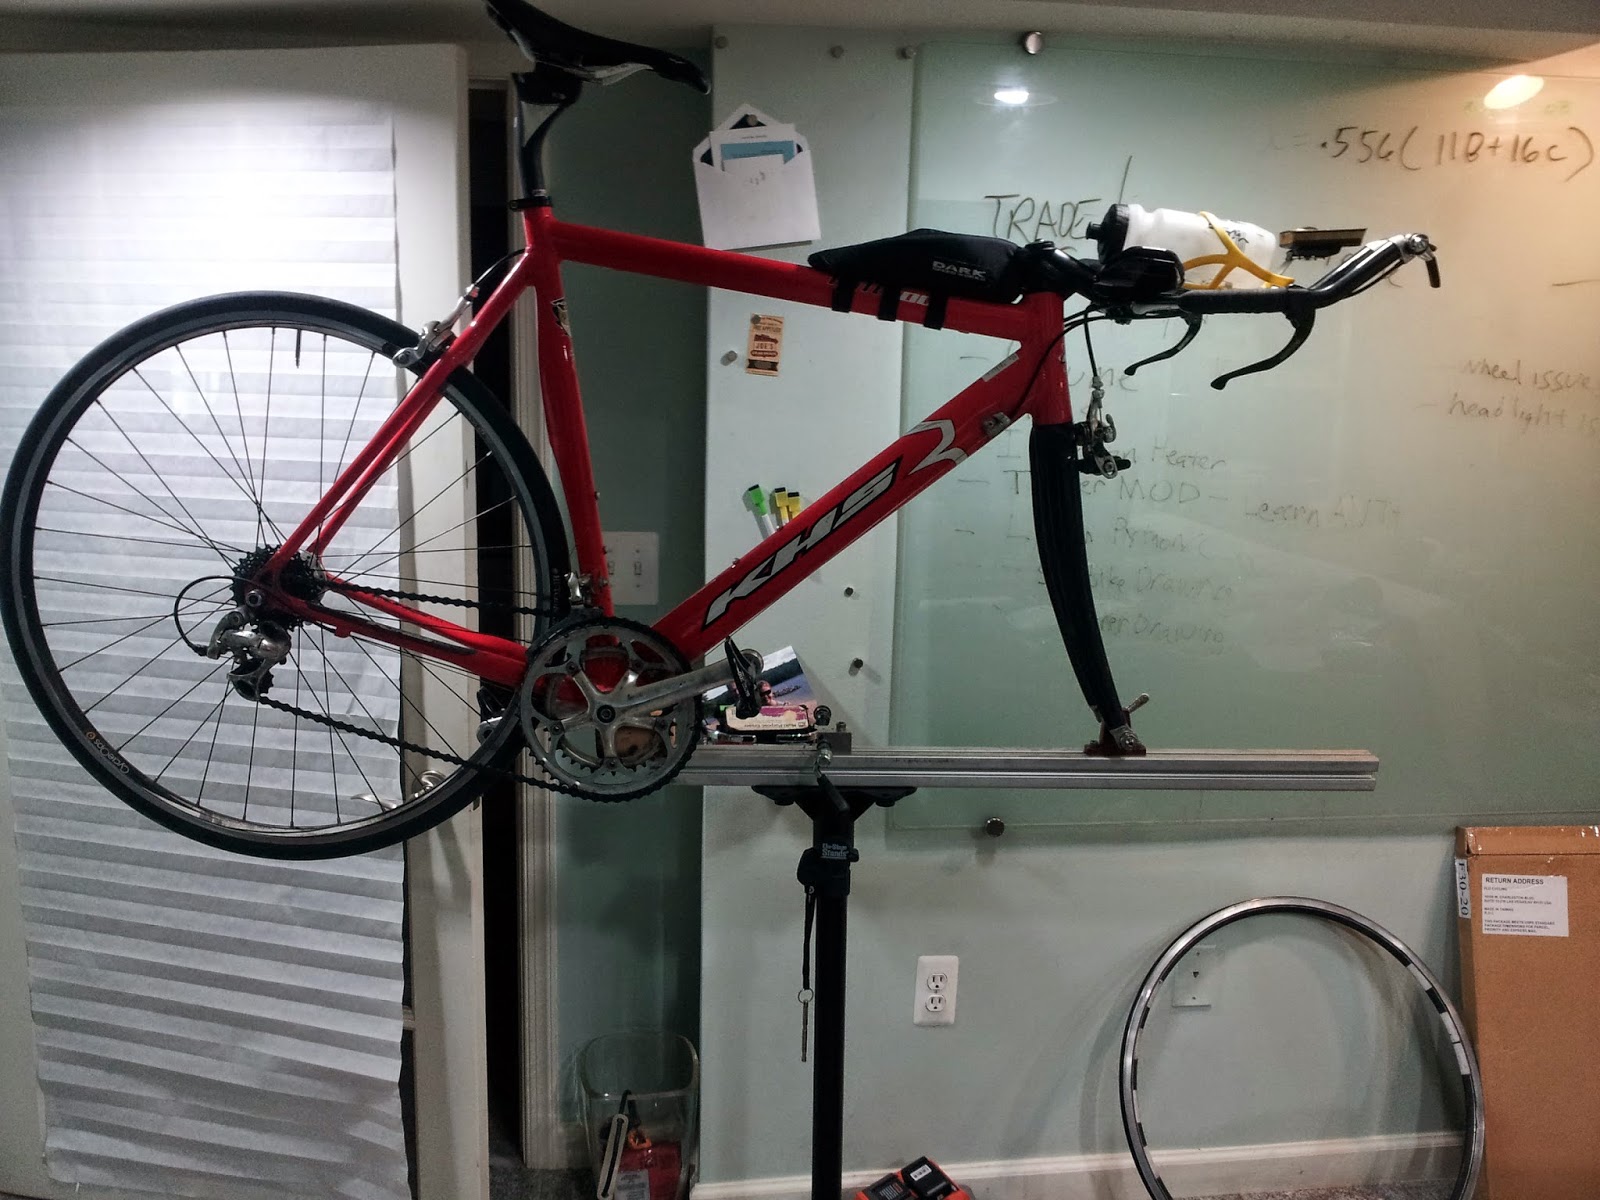 Vainglorious Escapades: Professional/Race/Euro style bicycle repair stand on the cheap/DIY